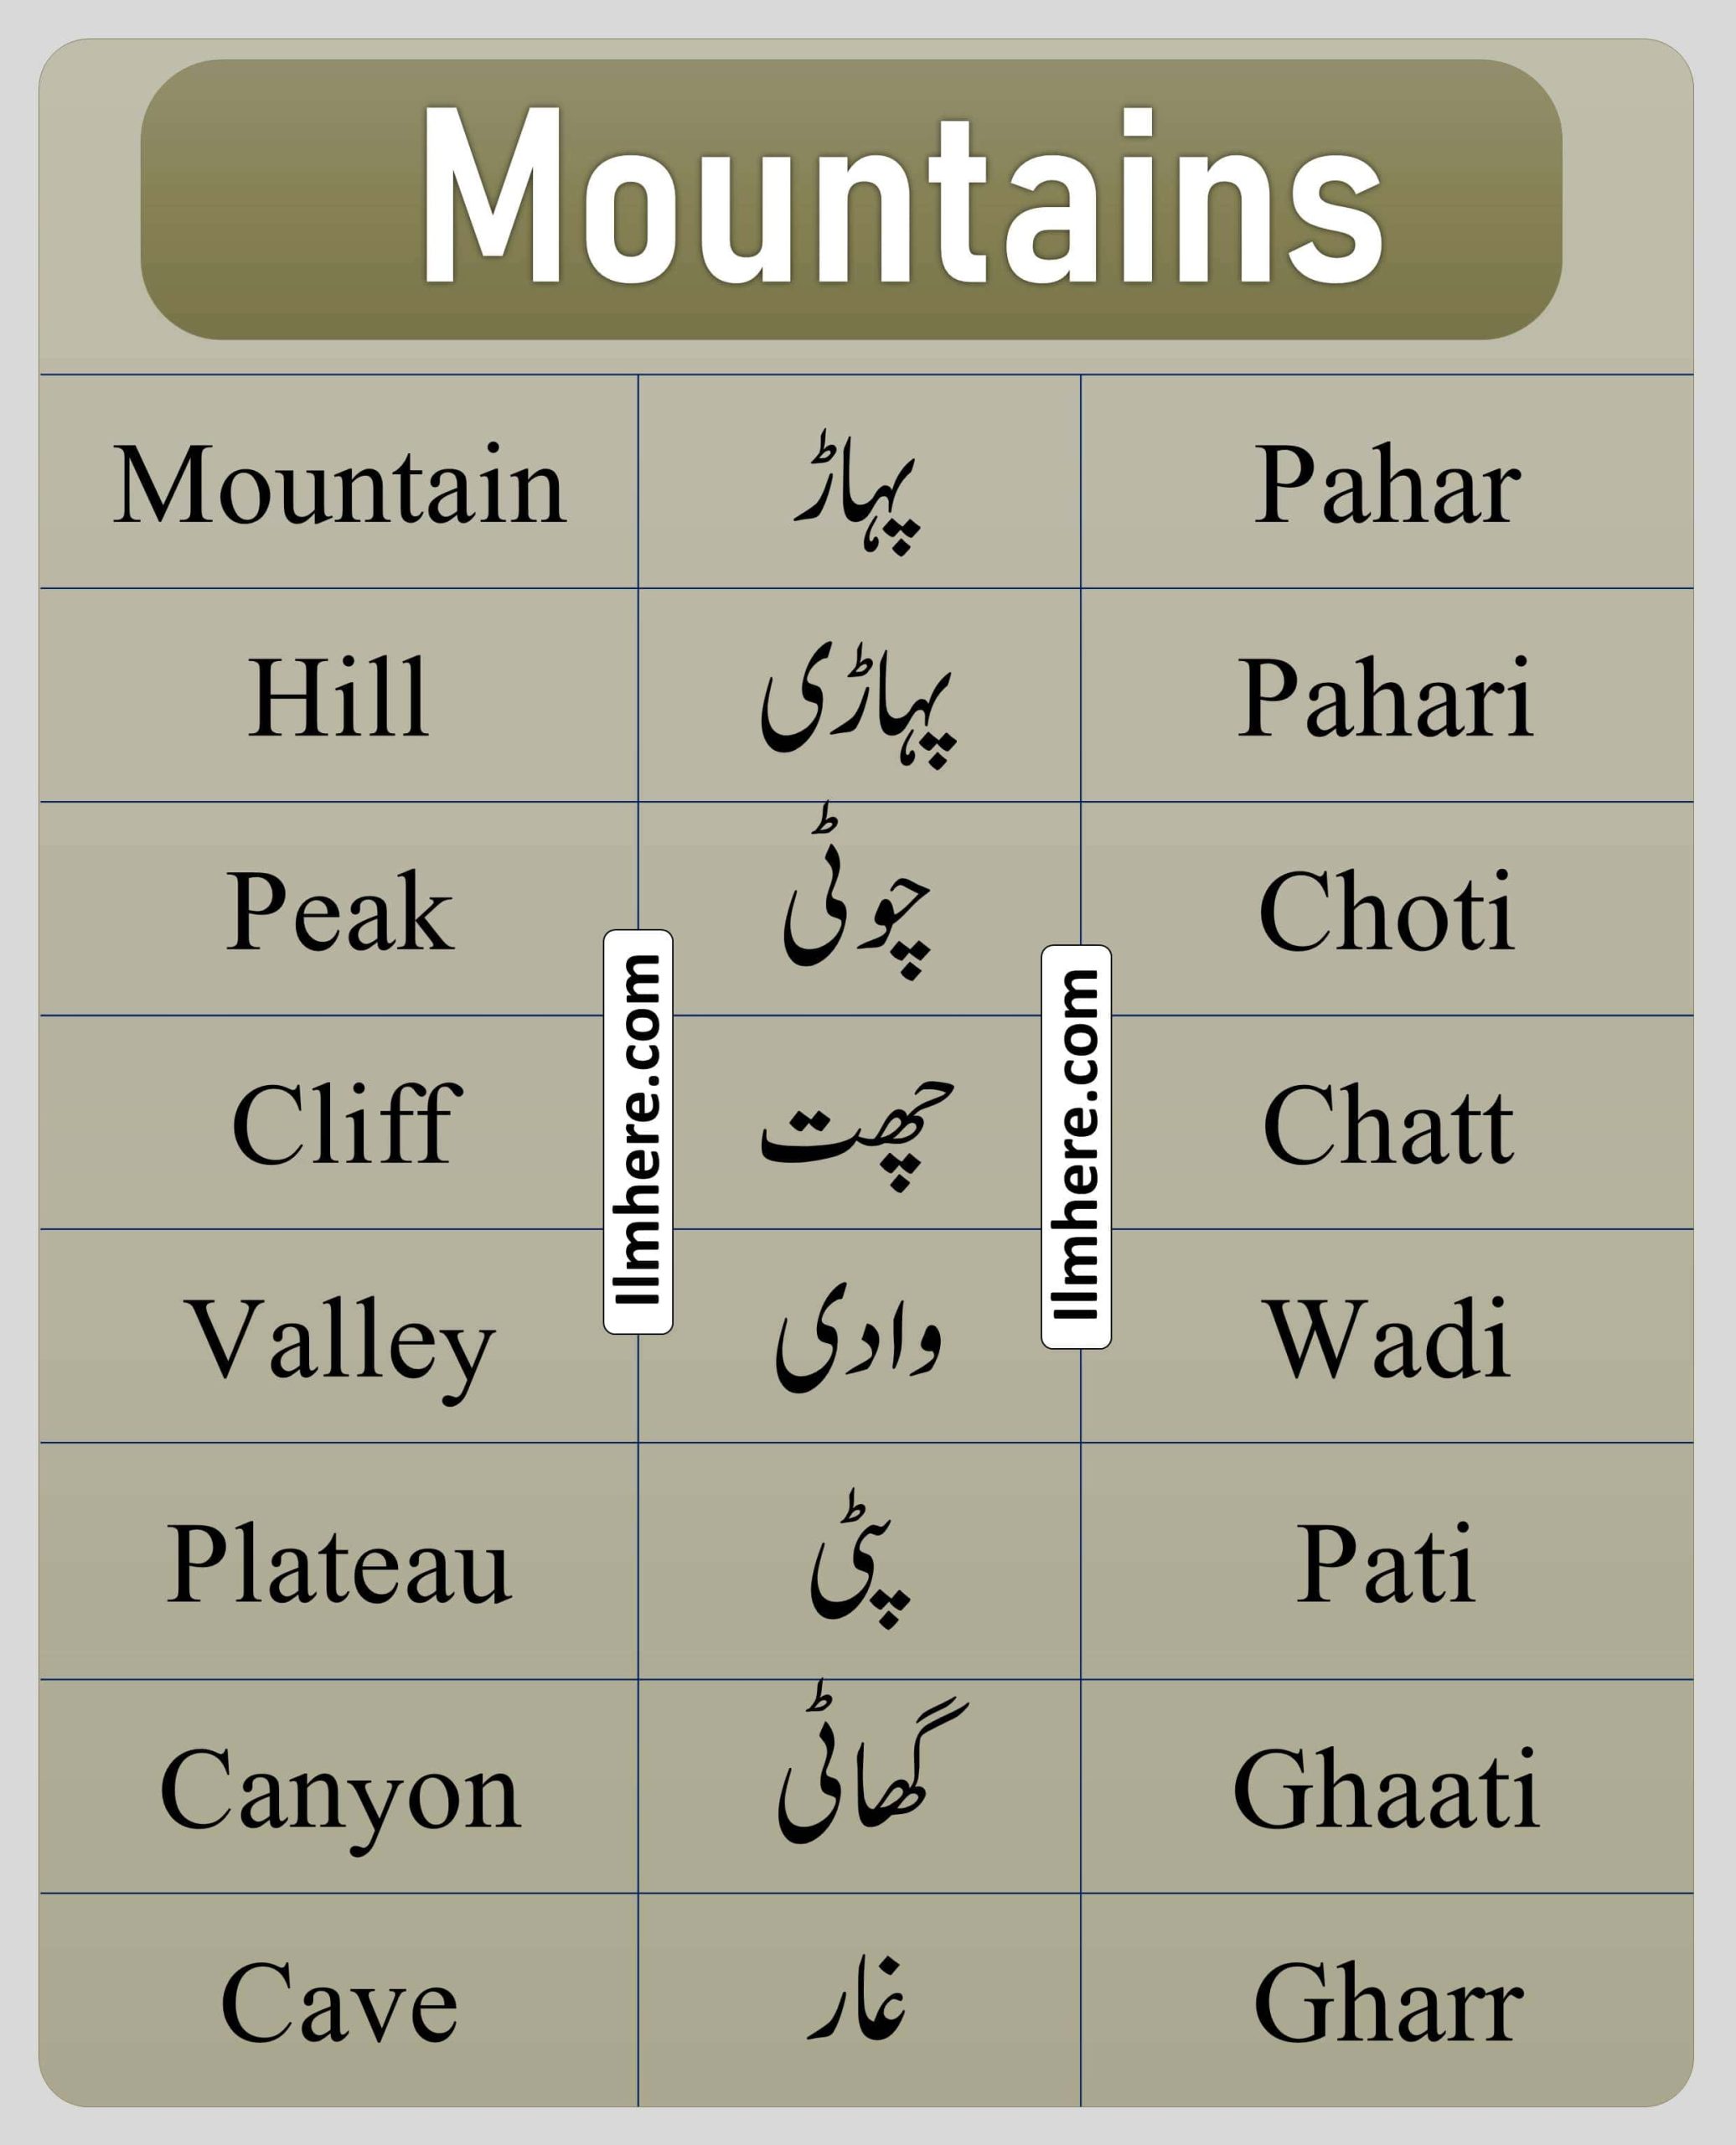 Mountains Places Names in English and Urdu